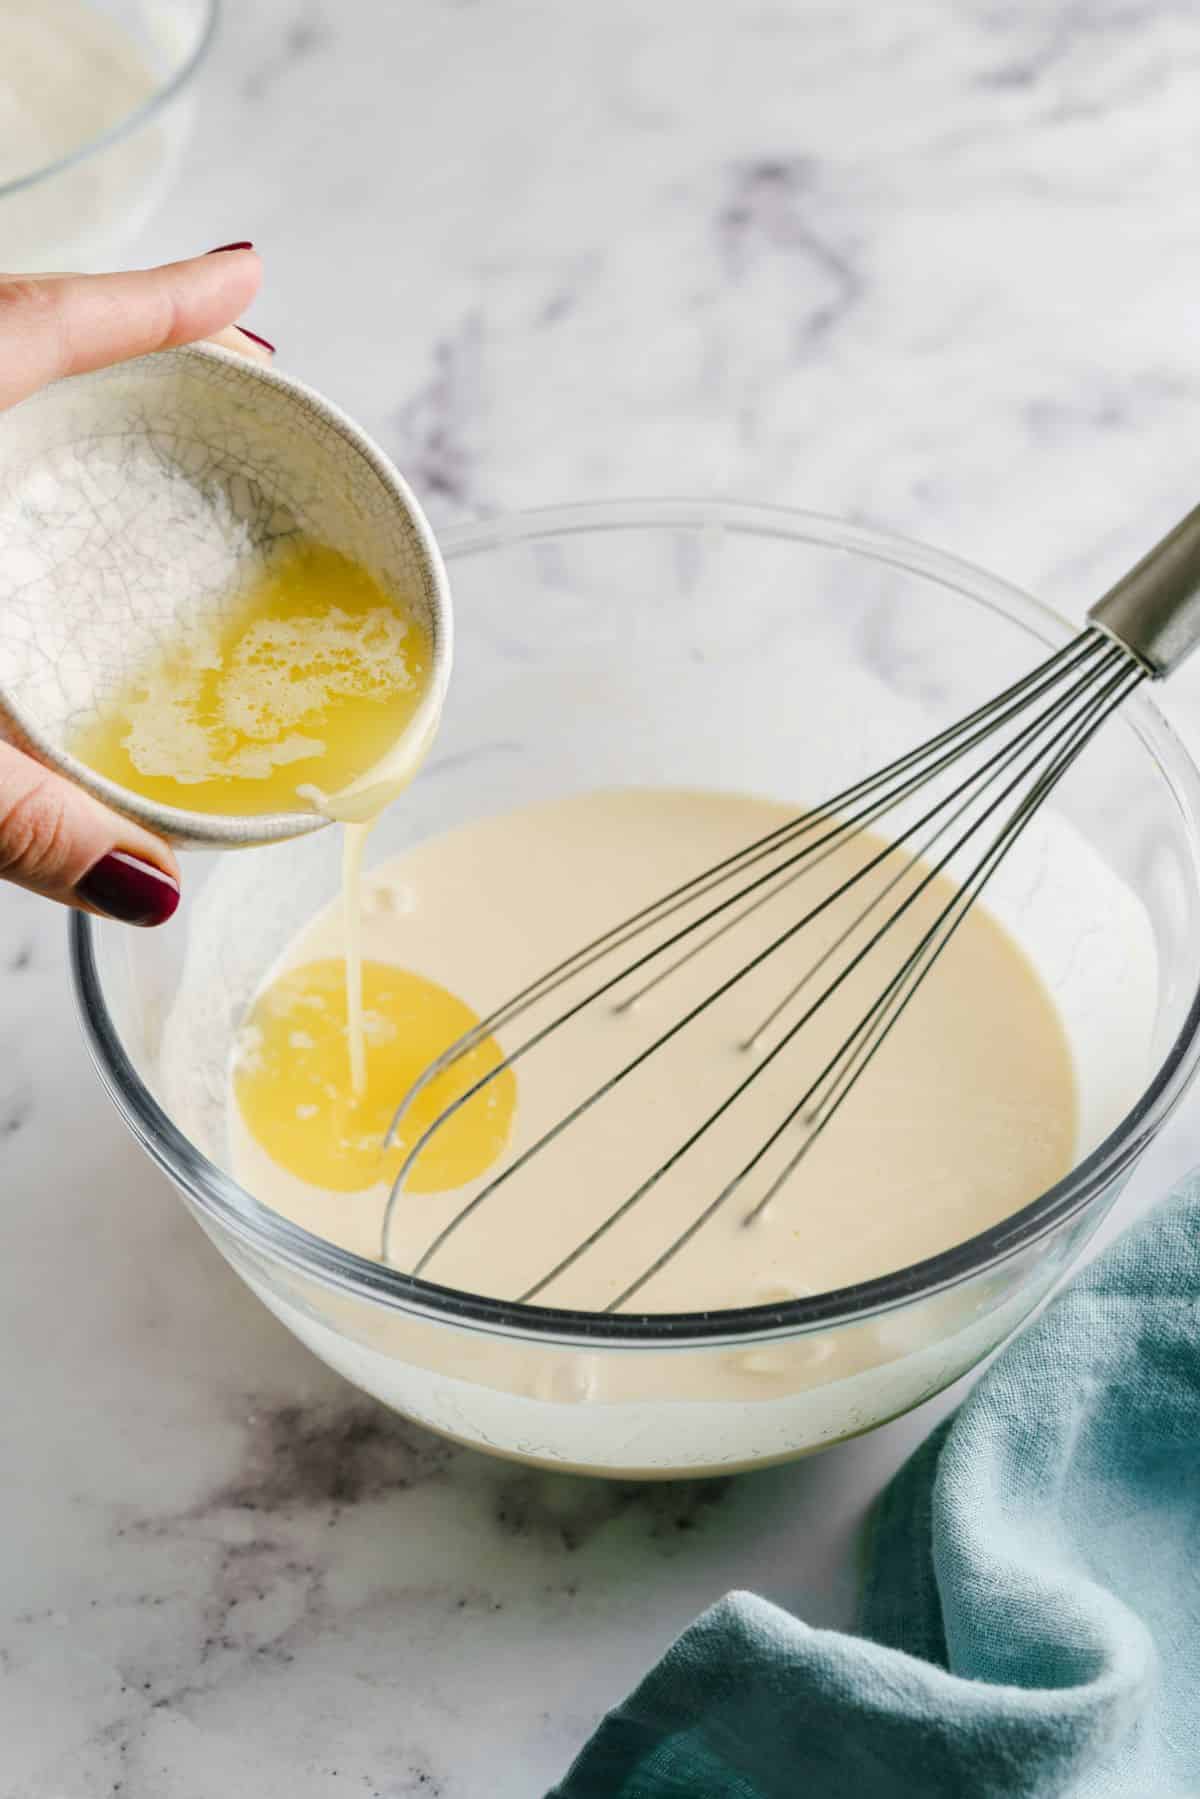 melted butter being added to pancake batter.